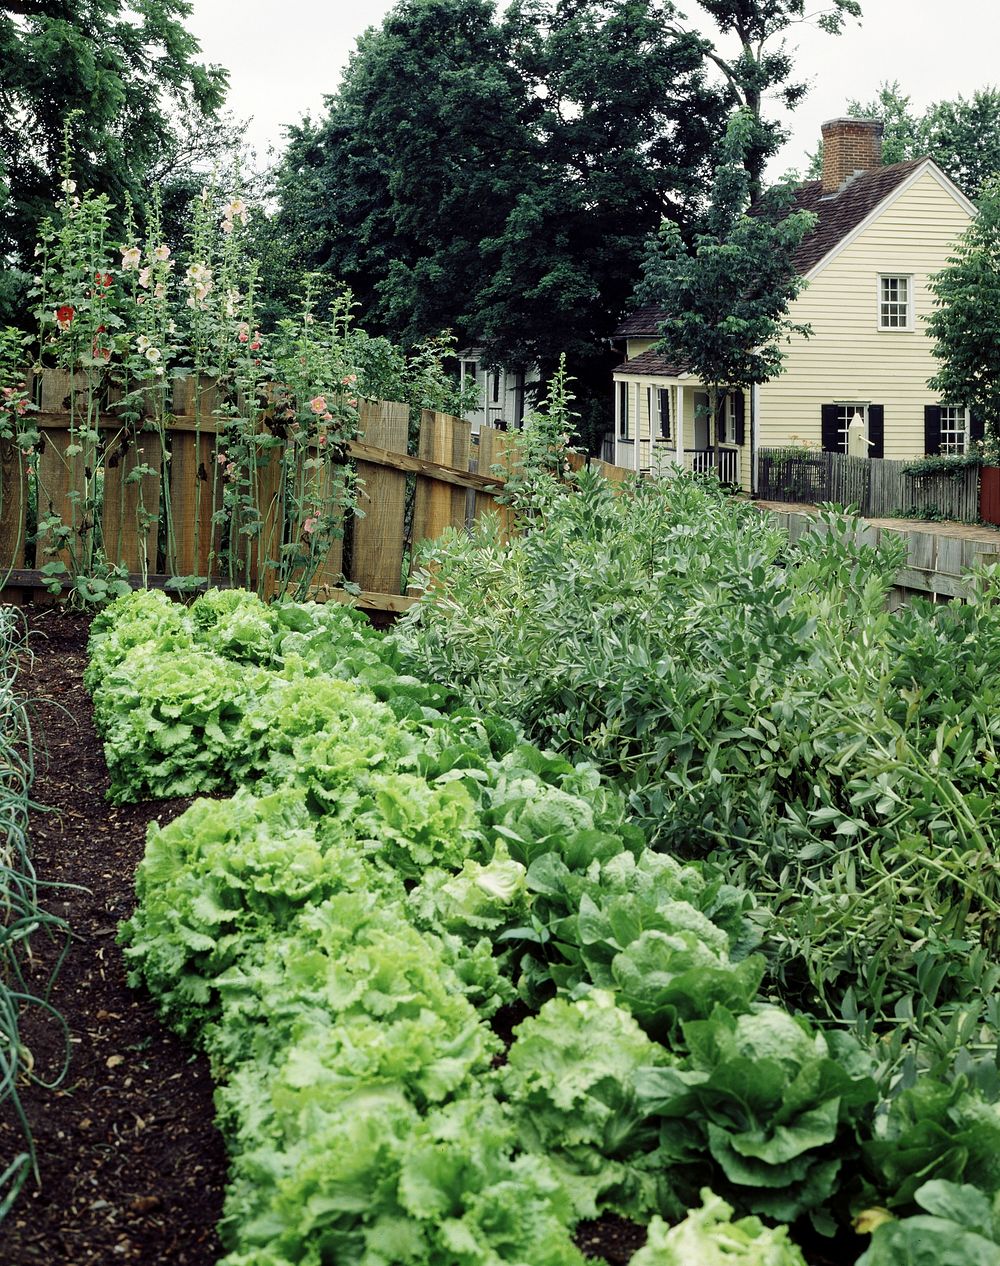 Garden, Old Salem, North Carolina. Original image from Carol M. Highsmith&rsquo;s America, Library of Congress collection.…